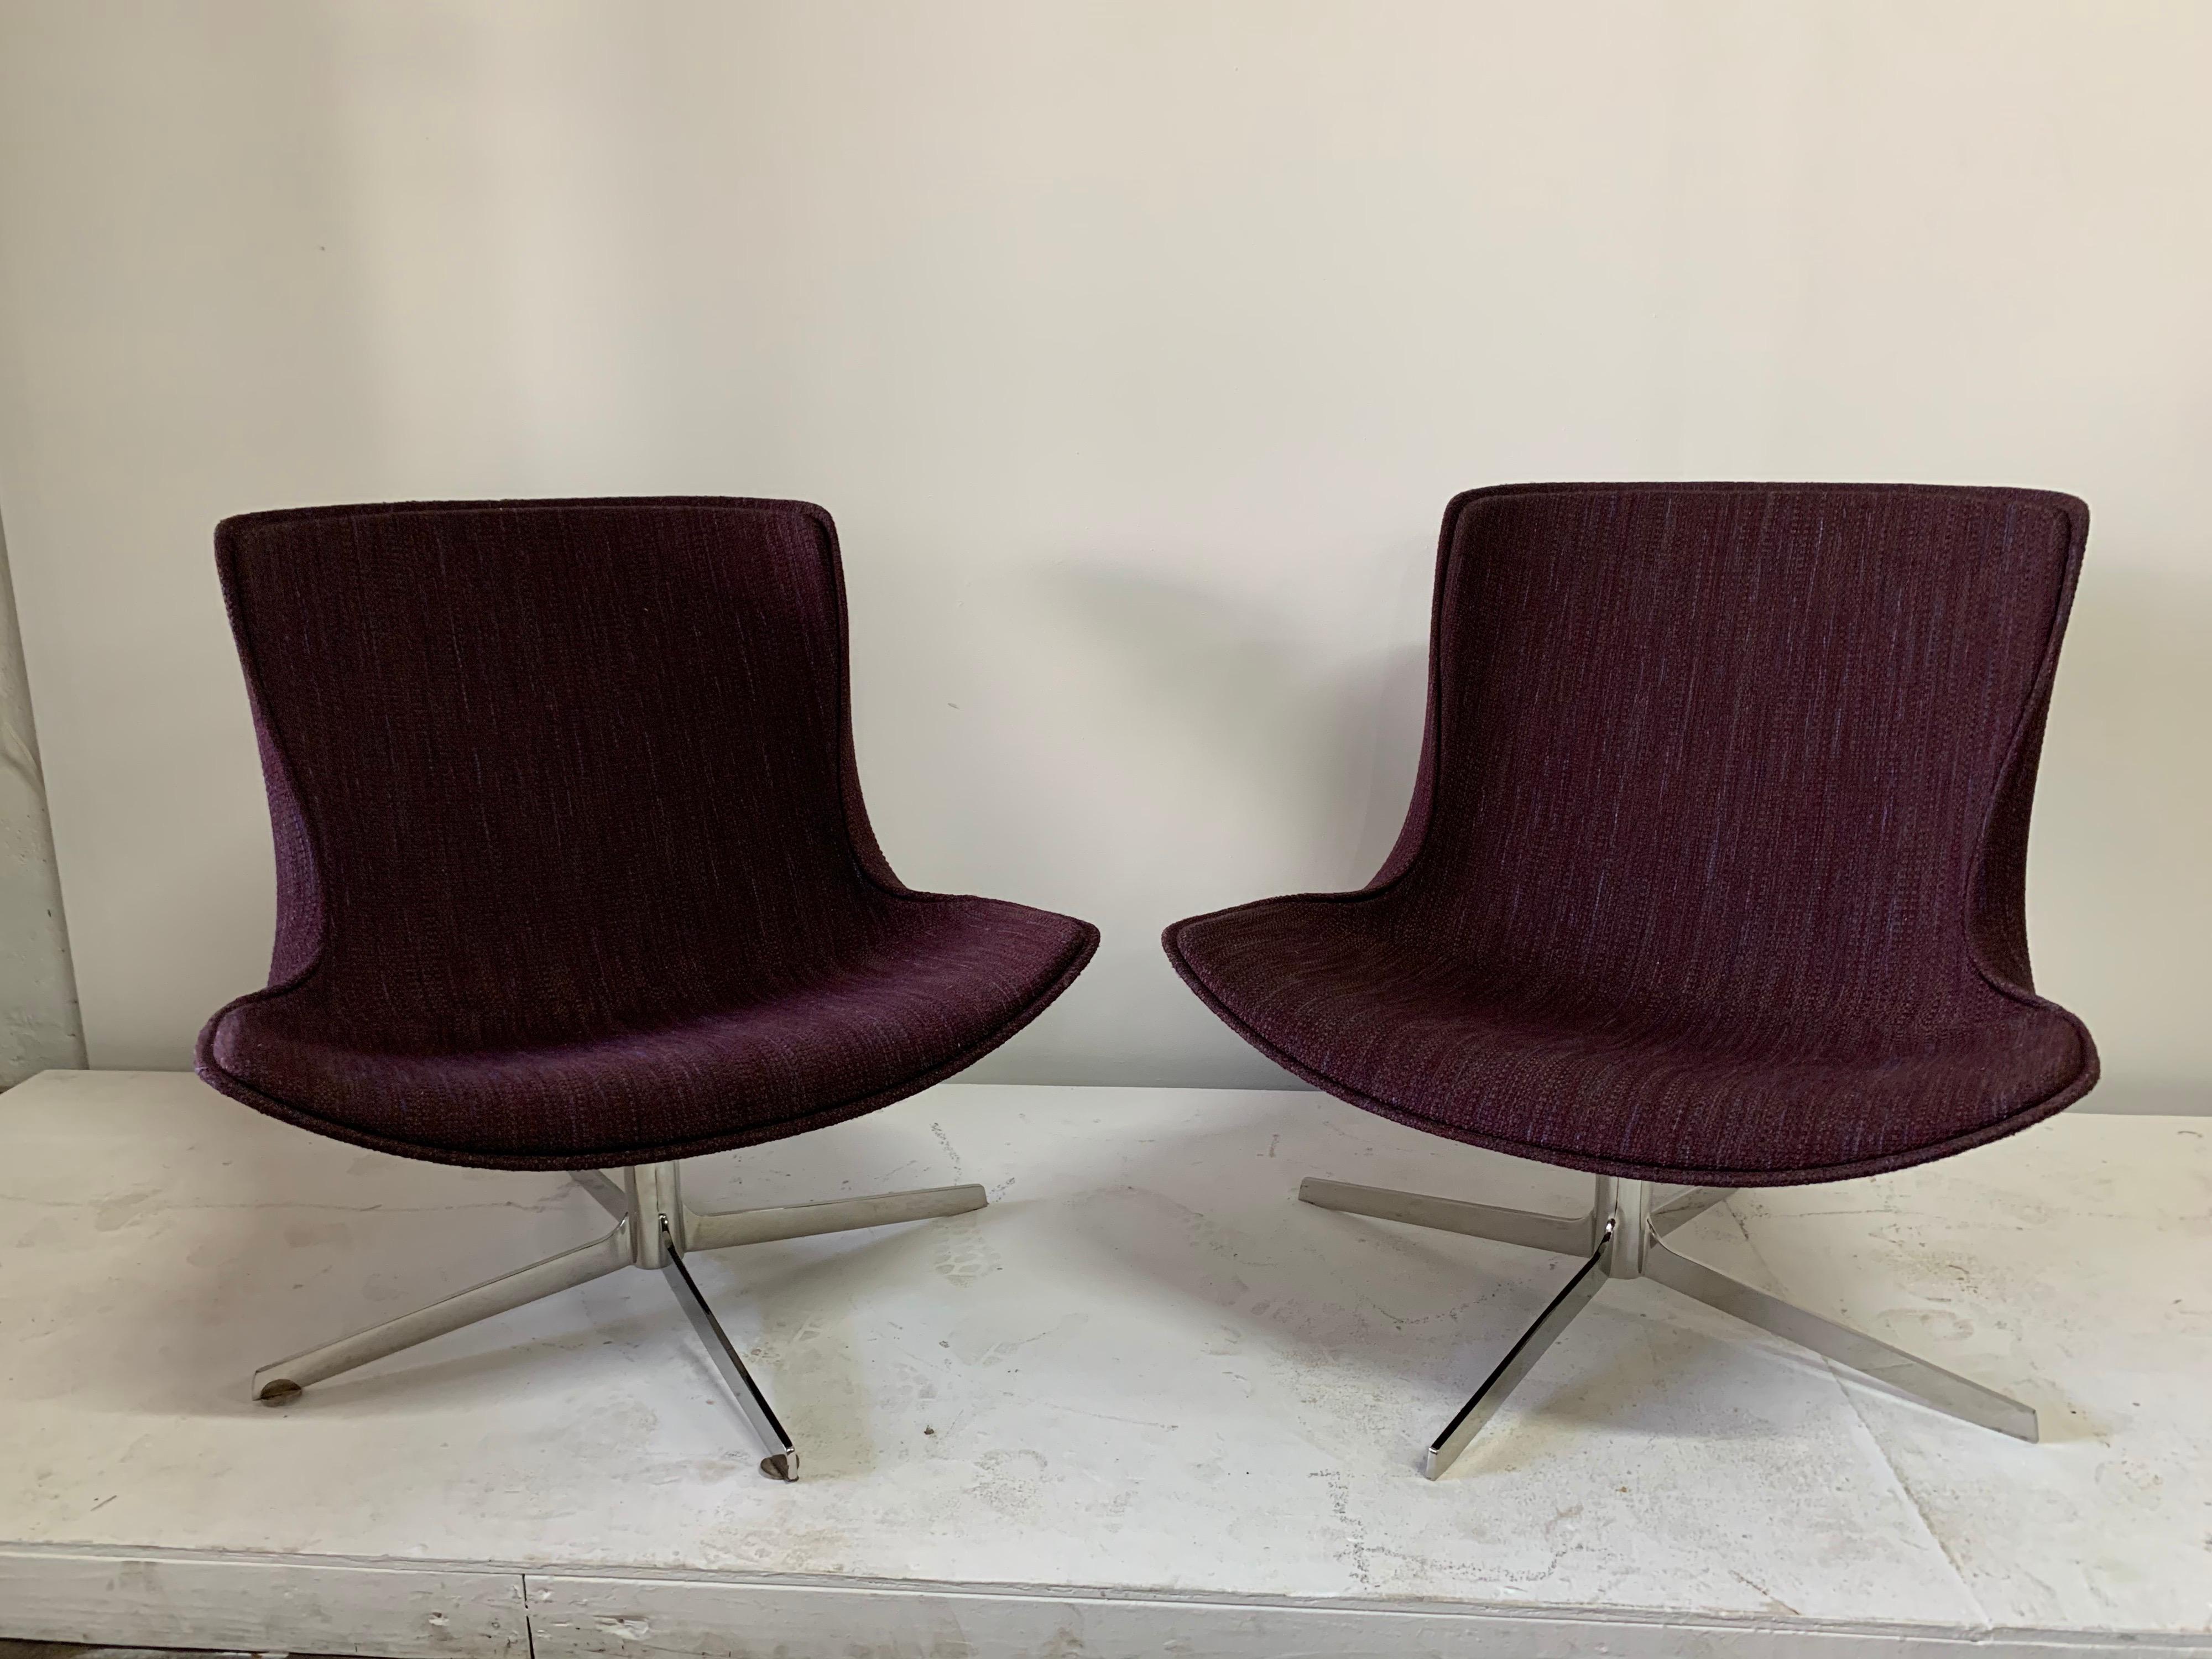 Nicos Zographos Style Midcentury Swivel Chairs, Pair For Sale 6